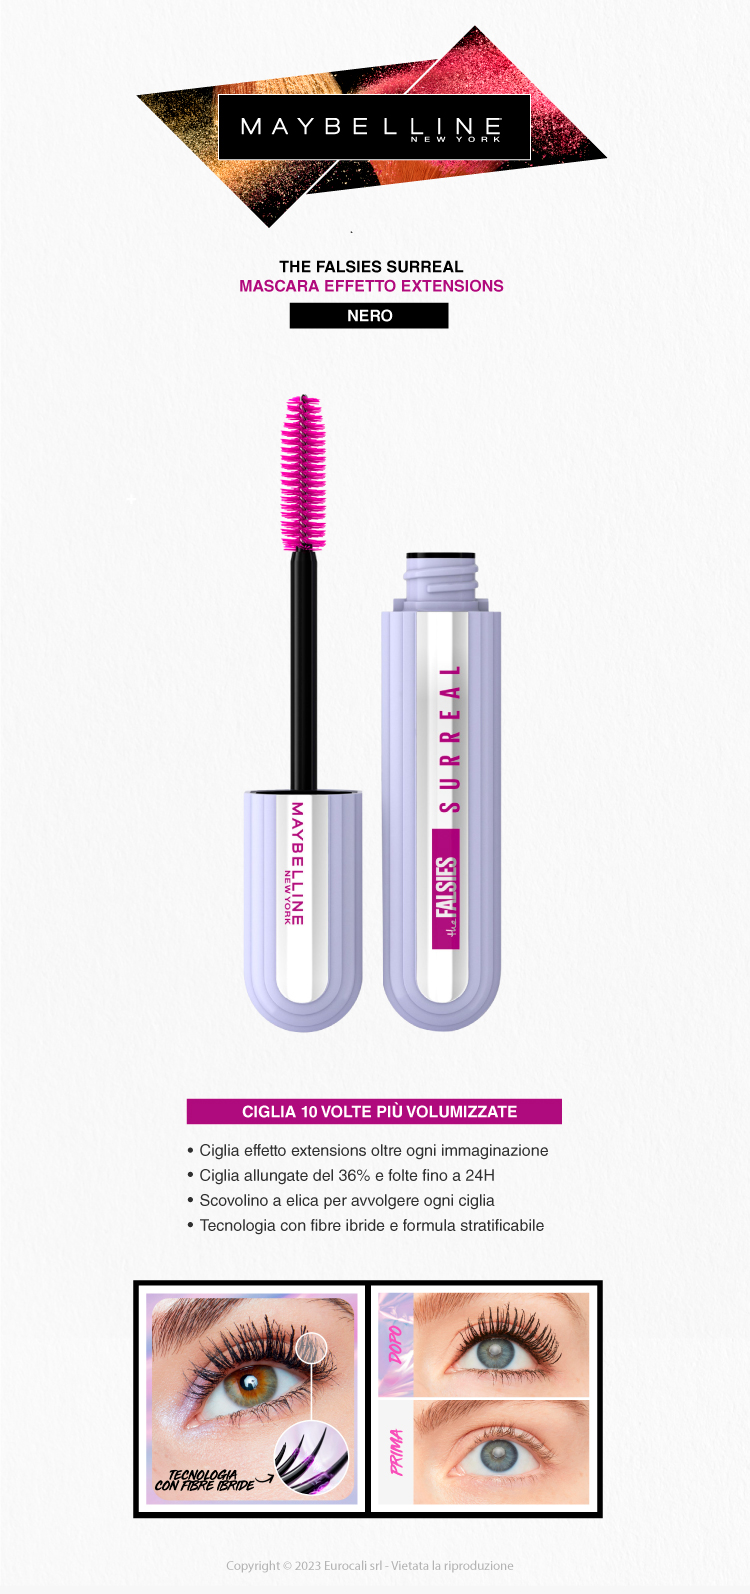 Maybelline The Falsies Surreal Mascara effetto extensions